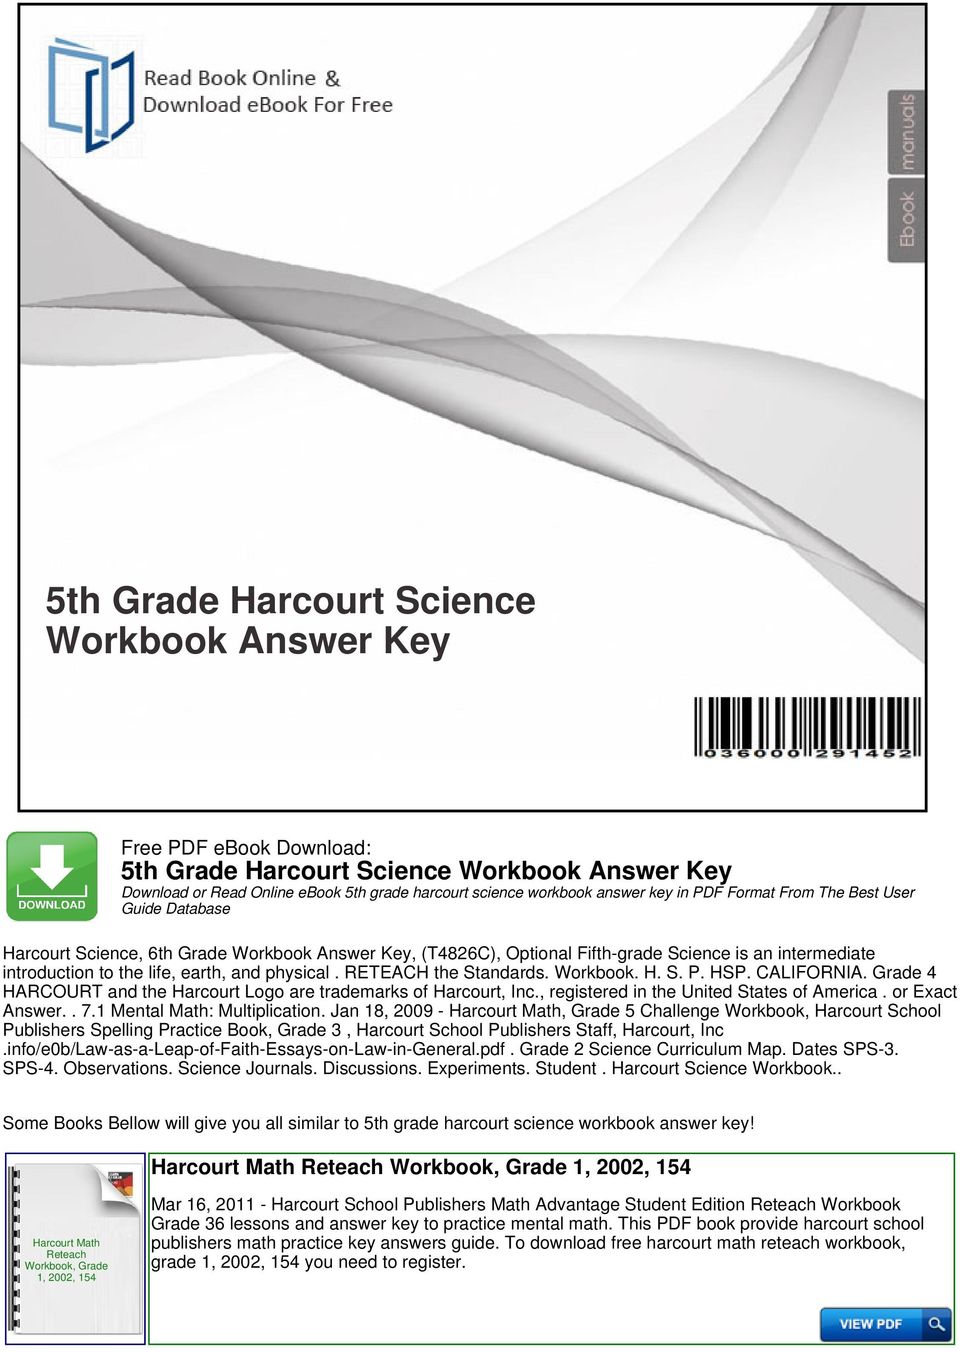 Grade 4 HARCOURT and the Harcourt Logo are trademarks of Harcourt, Inc., registered in the United States of America. or Exact Answer.. 7.1 Mental Math: Multiplication.